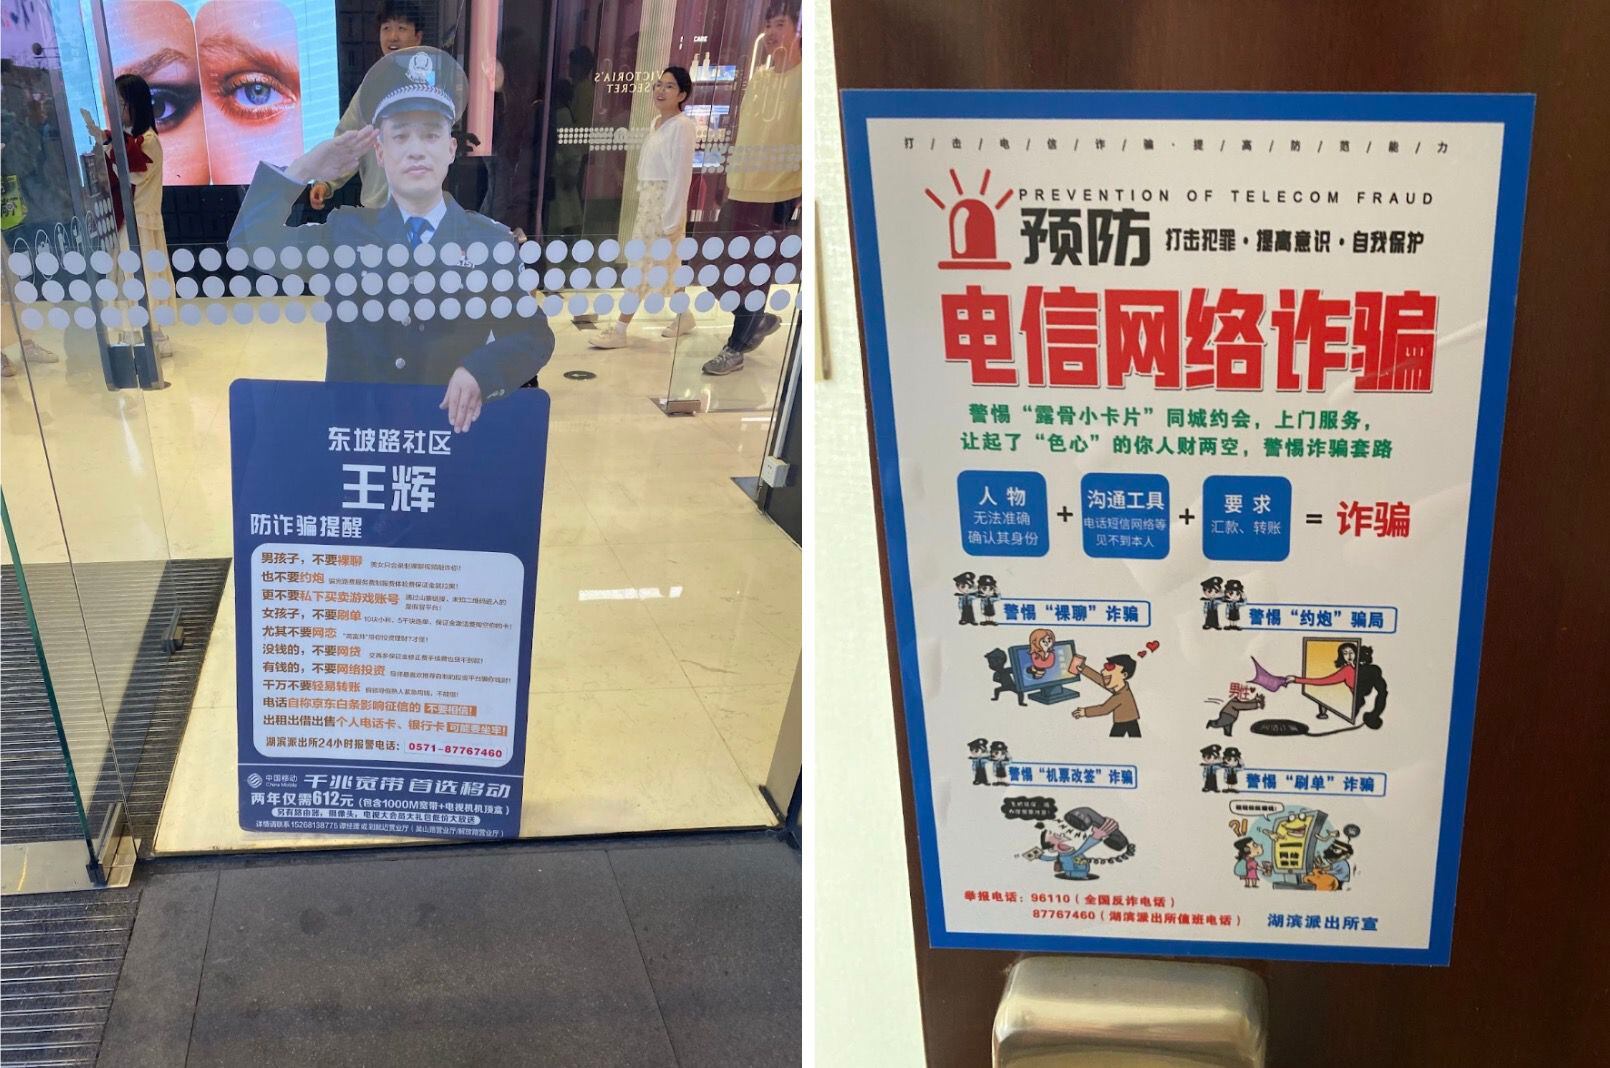 Scam warnings in a shopping mall and hotel room in Hangzhou. Photo credit: Callan Quinn/ DL News